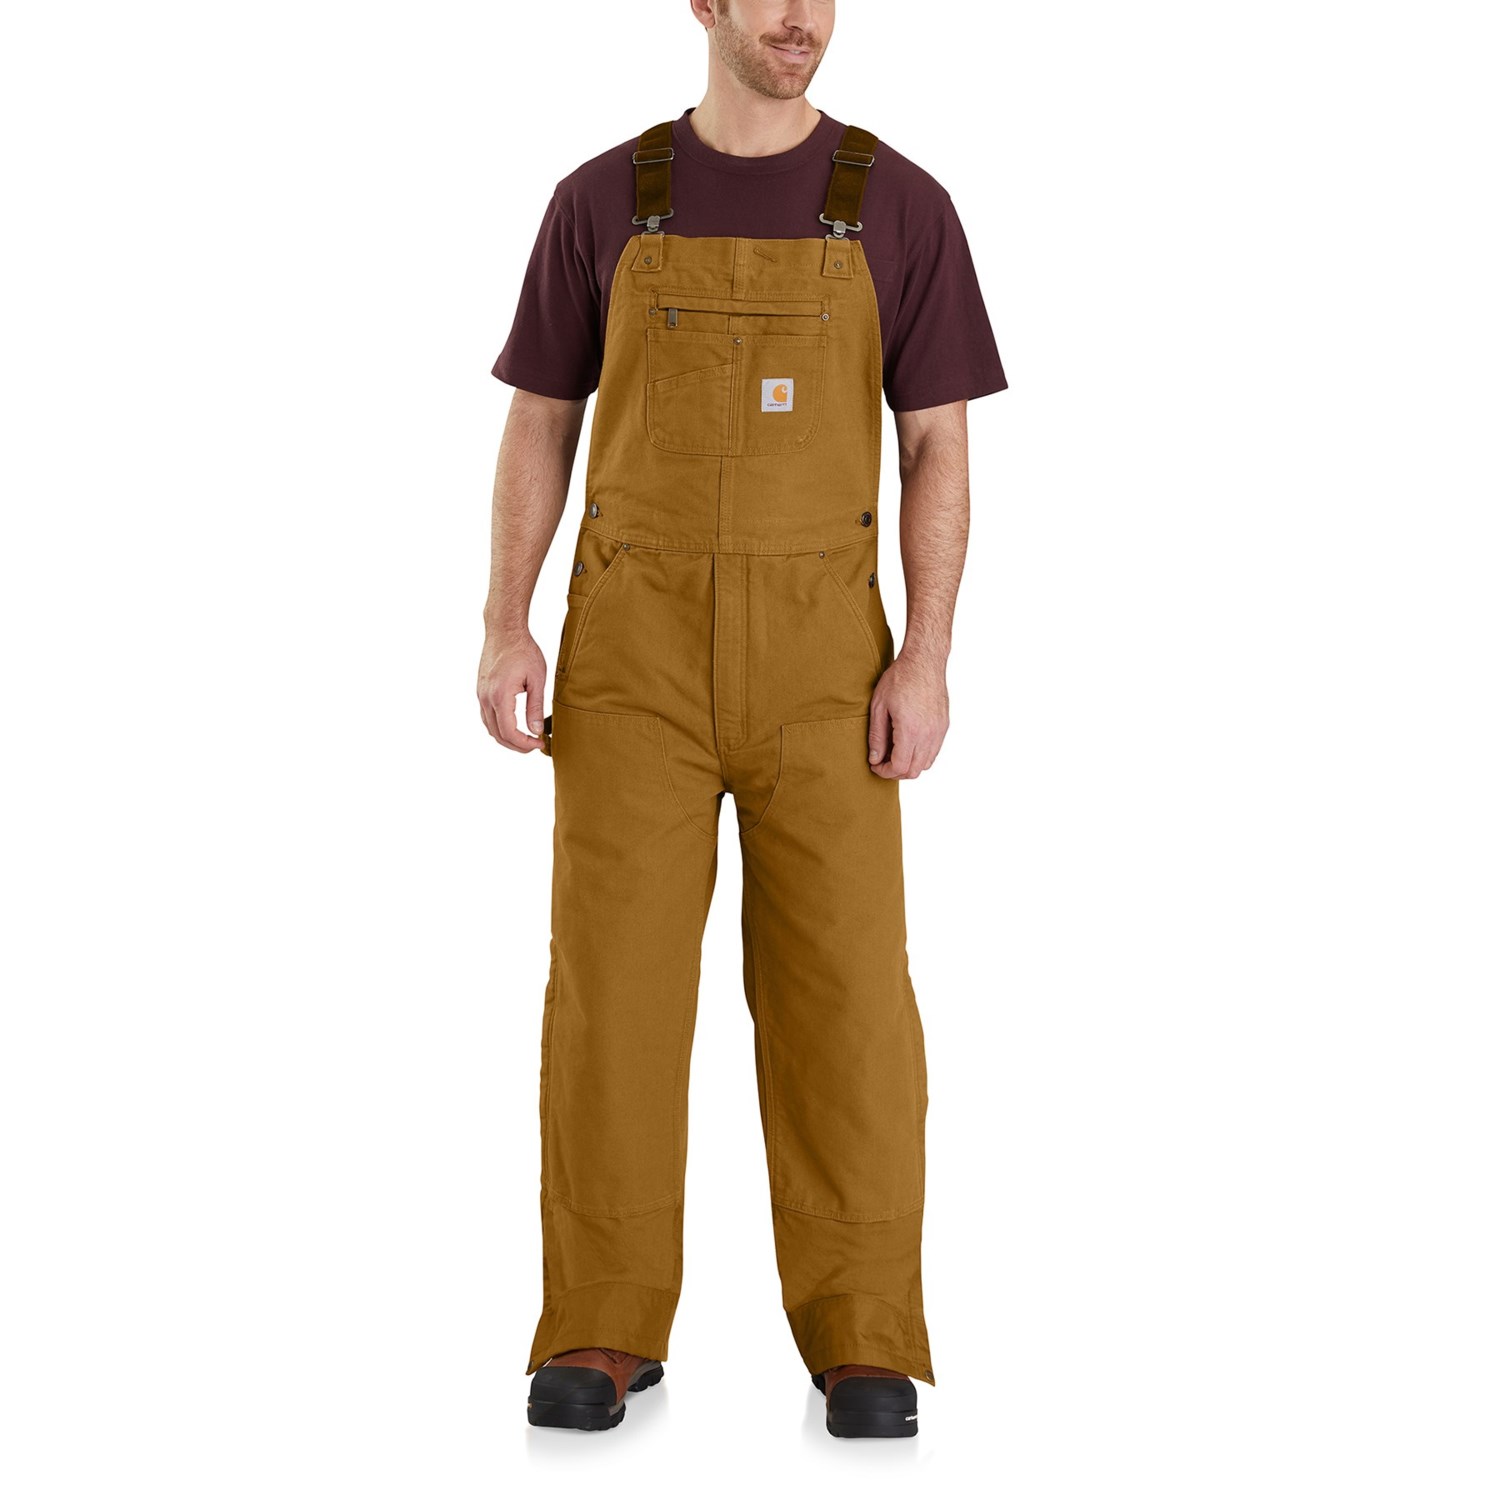 Carhartt 104031 Big and Tall Washed Duck Bib Overalls - Quilt Lined, Insulated, Factory Seconds